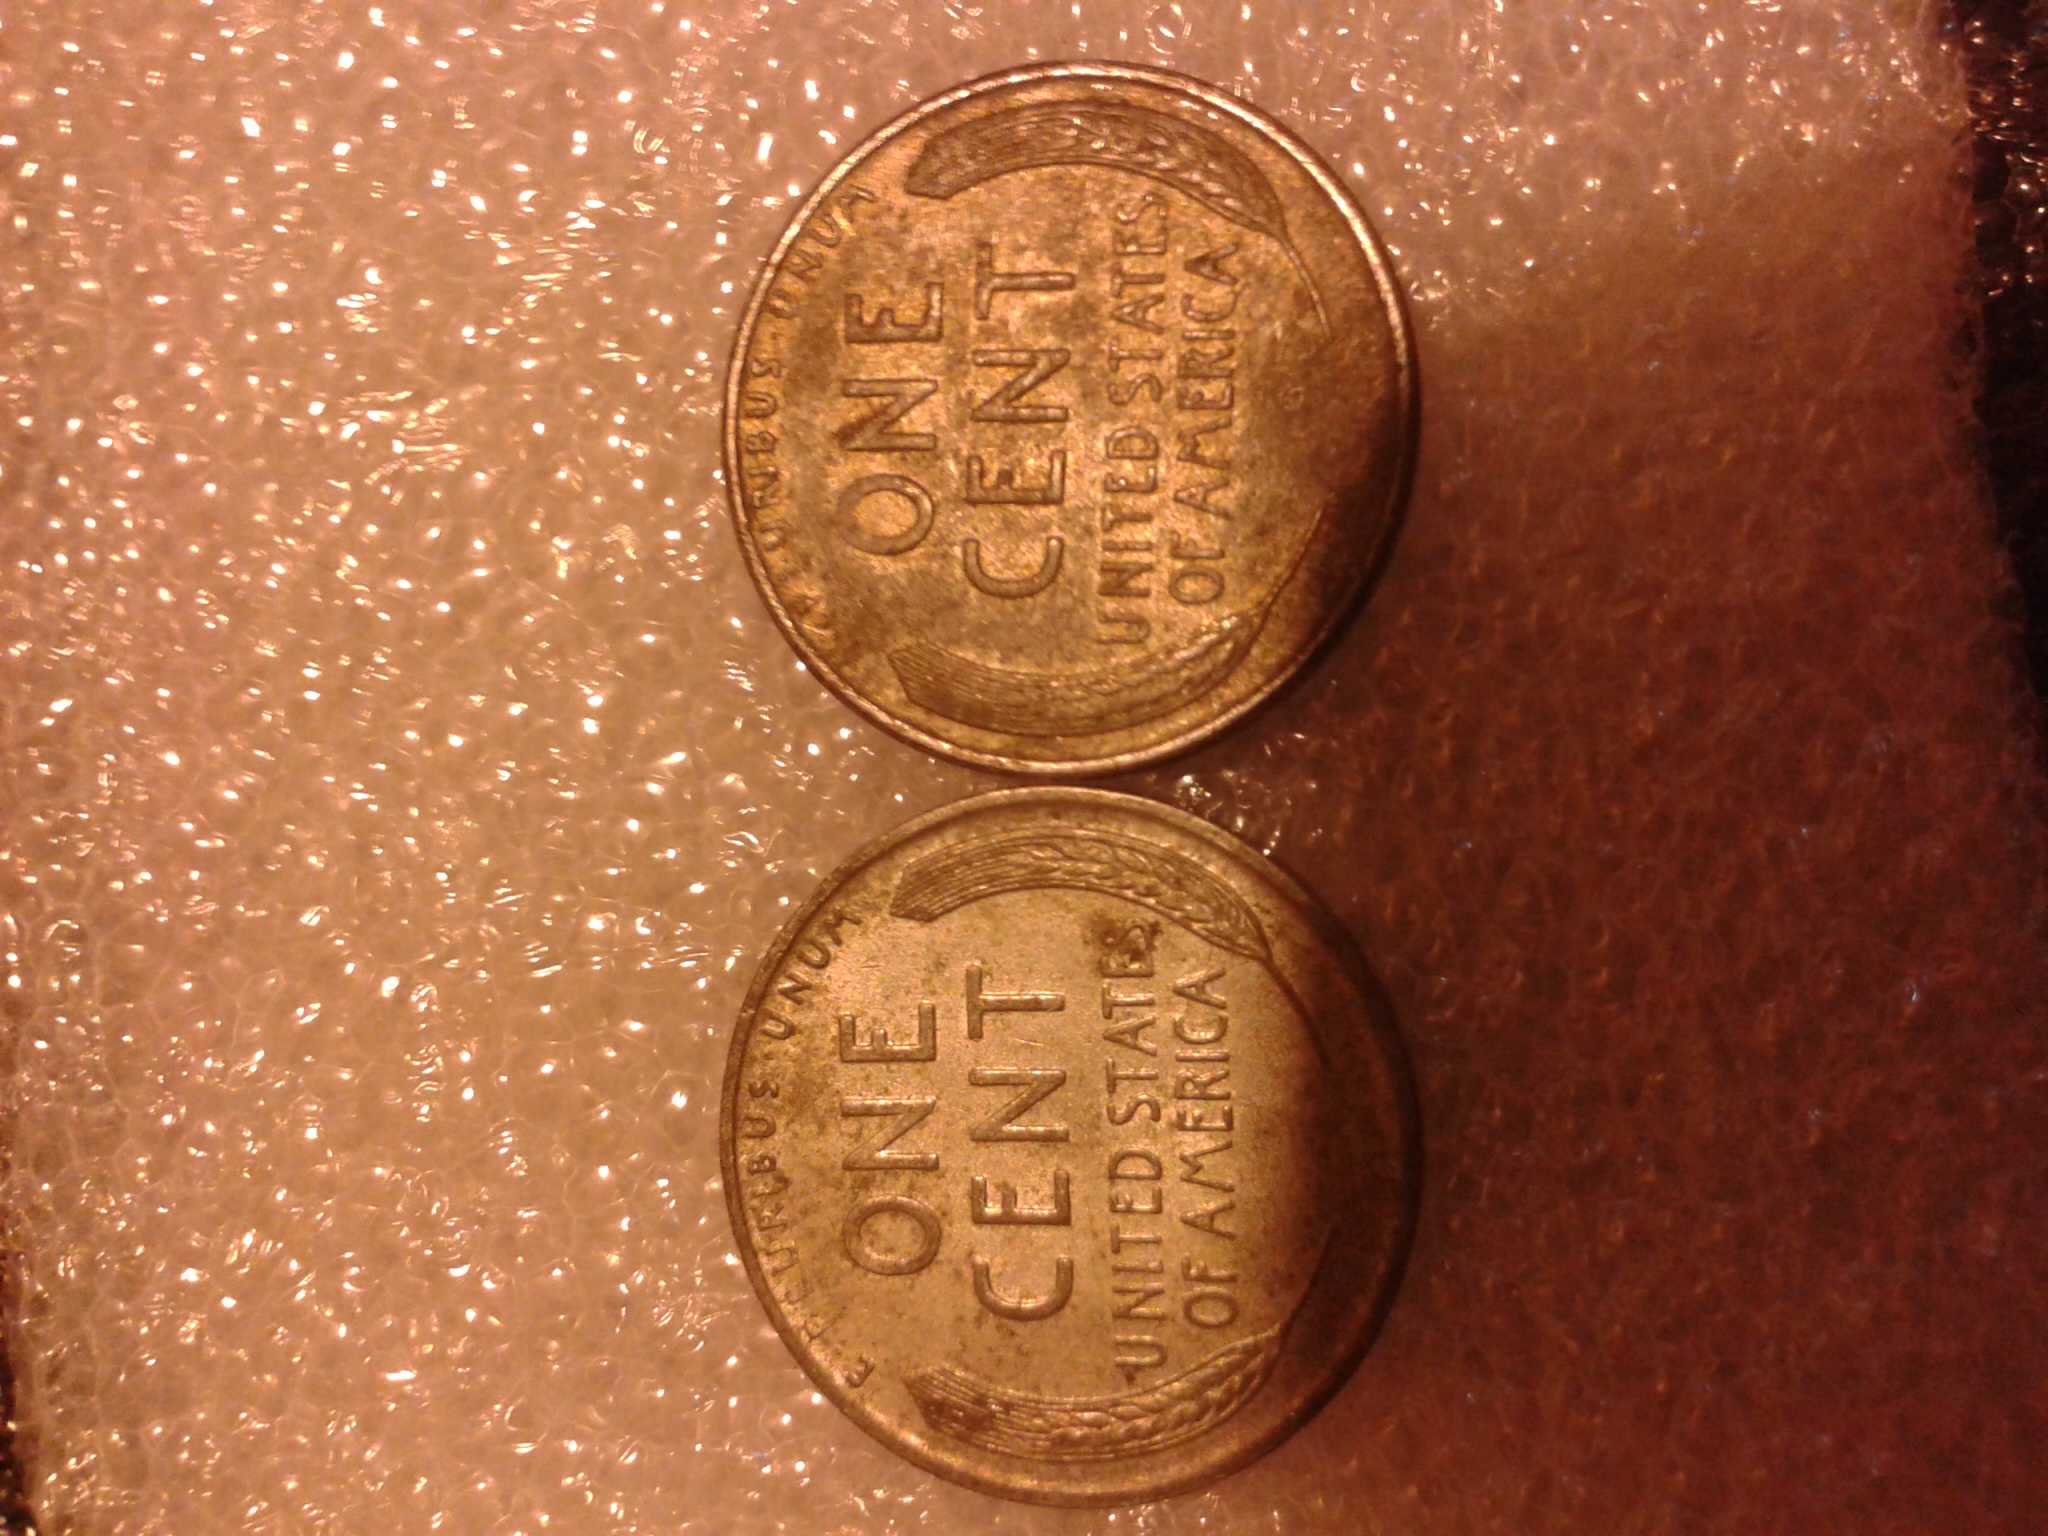 Do old pennies have value?